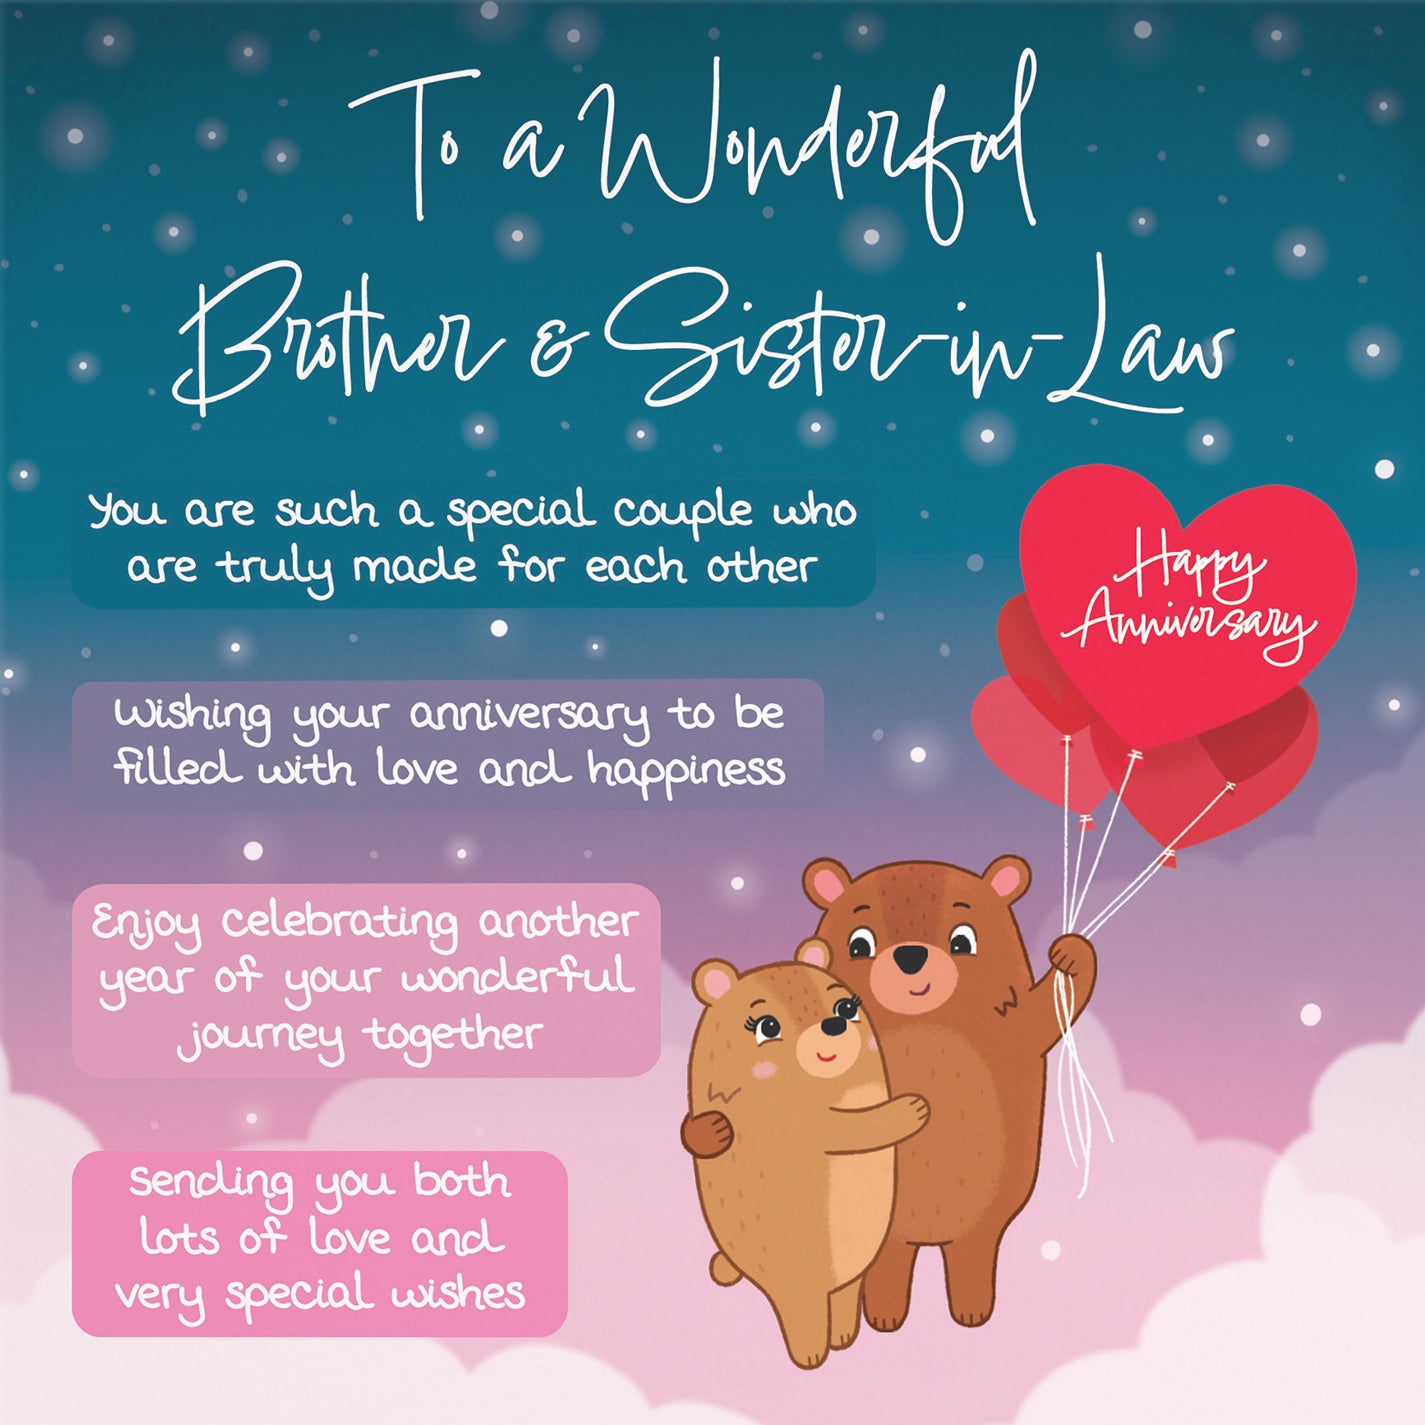 Brother And Sister In Law Poem Anniversary Card Starry Night Cute Bears